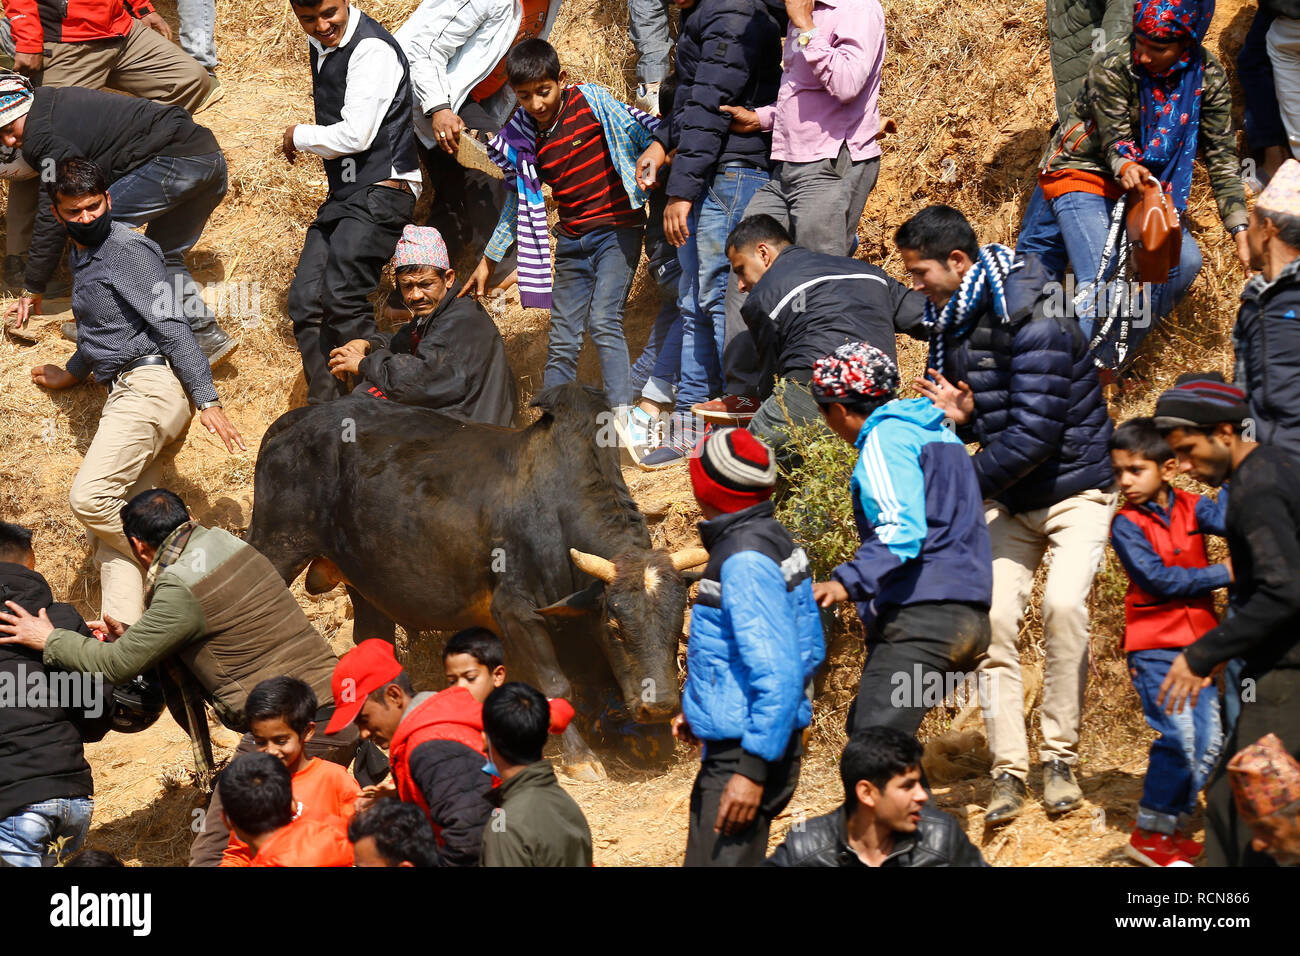 A bull seen running towards the crowd during the festival organized  to mark  Maghe Sangranti or Makar Sankranti festival. Thousands of people gathered at an open ground of Taruka village at Nuwakot district to witness a bull fighting festival that heralds the end of winter, according to the Hindu calendar. Stock Photo